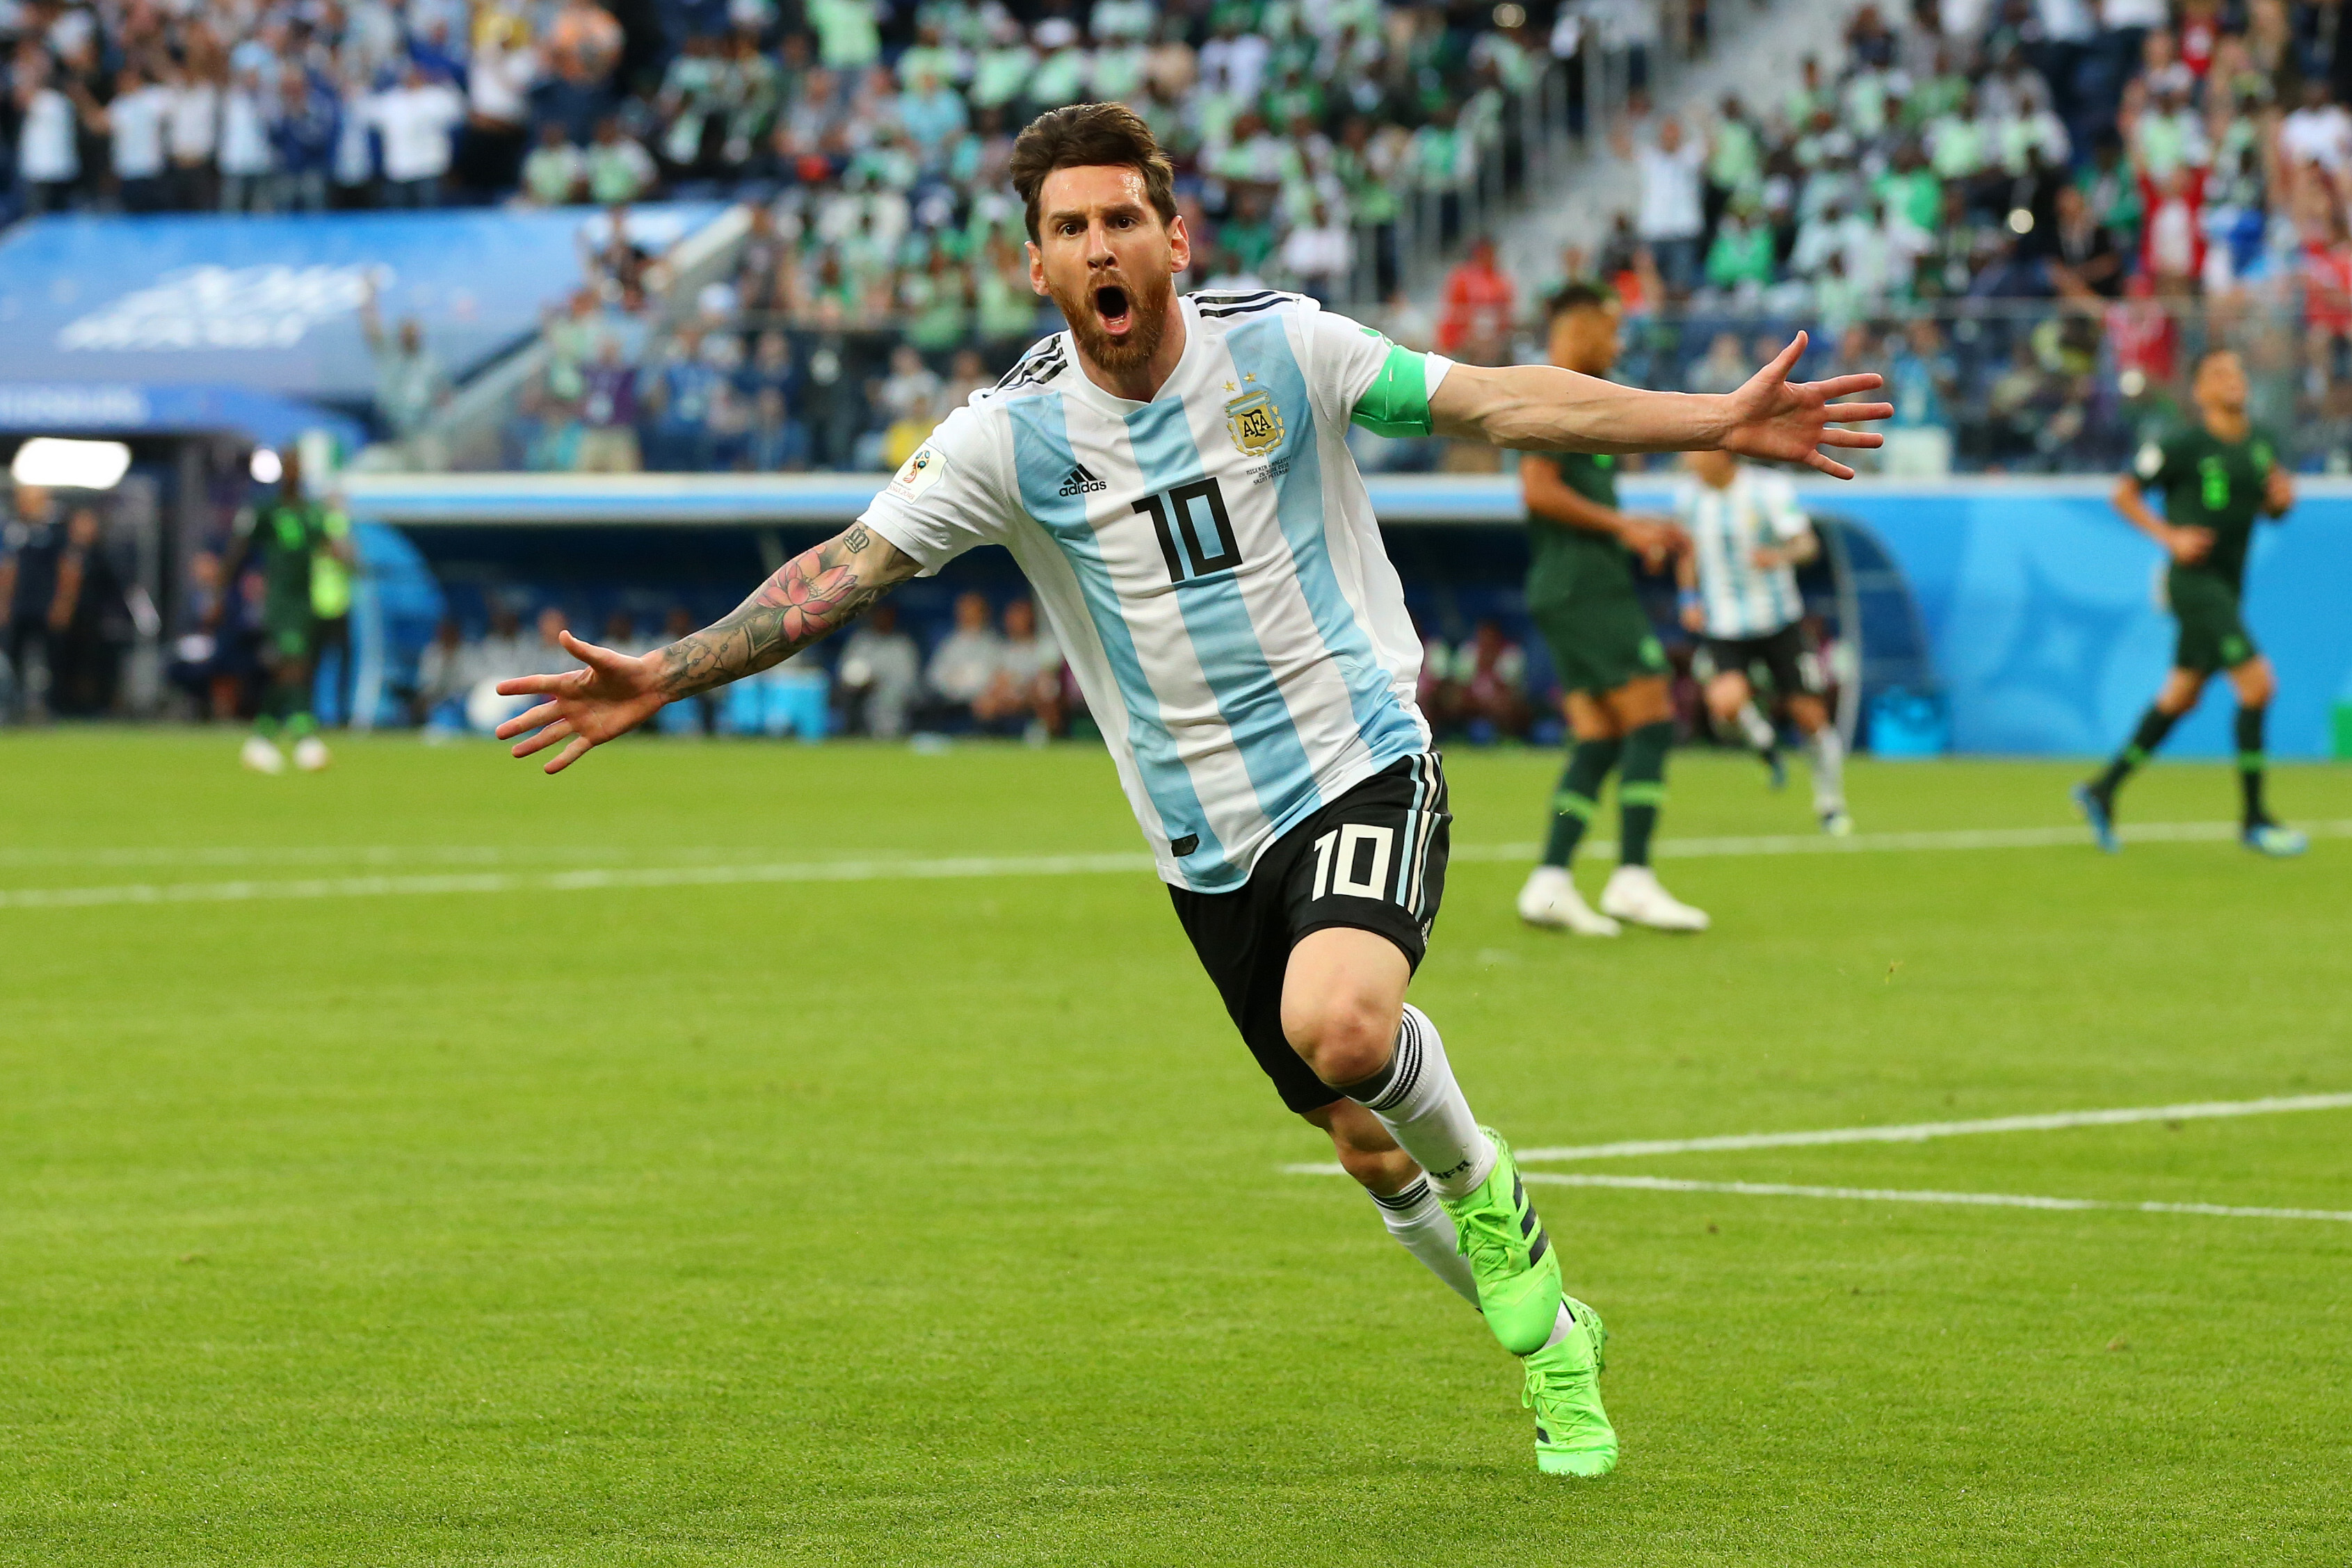 Lionel Messi In Fifa 2018 World Cup Wallpaper Hd Sports 4k Wallpapers Gambaran